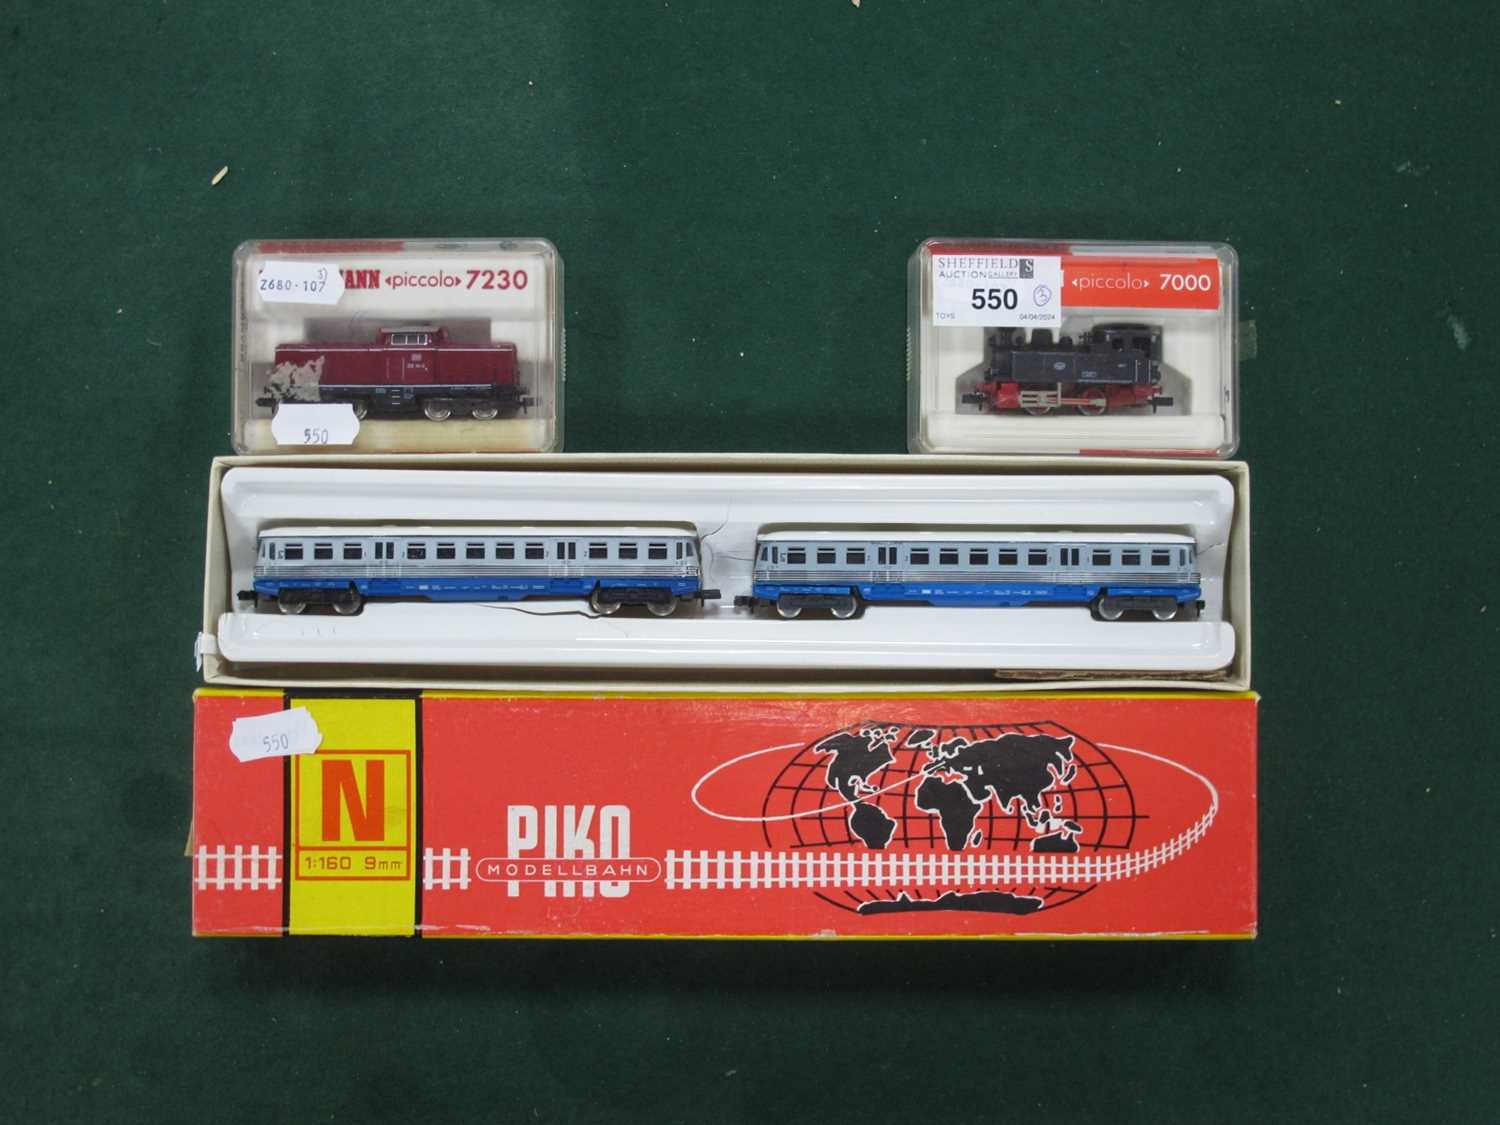 A Piko 'N' Gauge Ref No. 5/0649 Two Unit Class VT4-12 Diesel Railcar and Trailer, of the DB Railway.